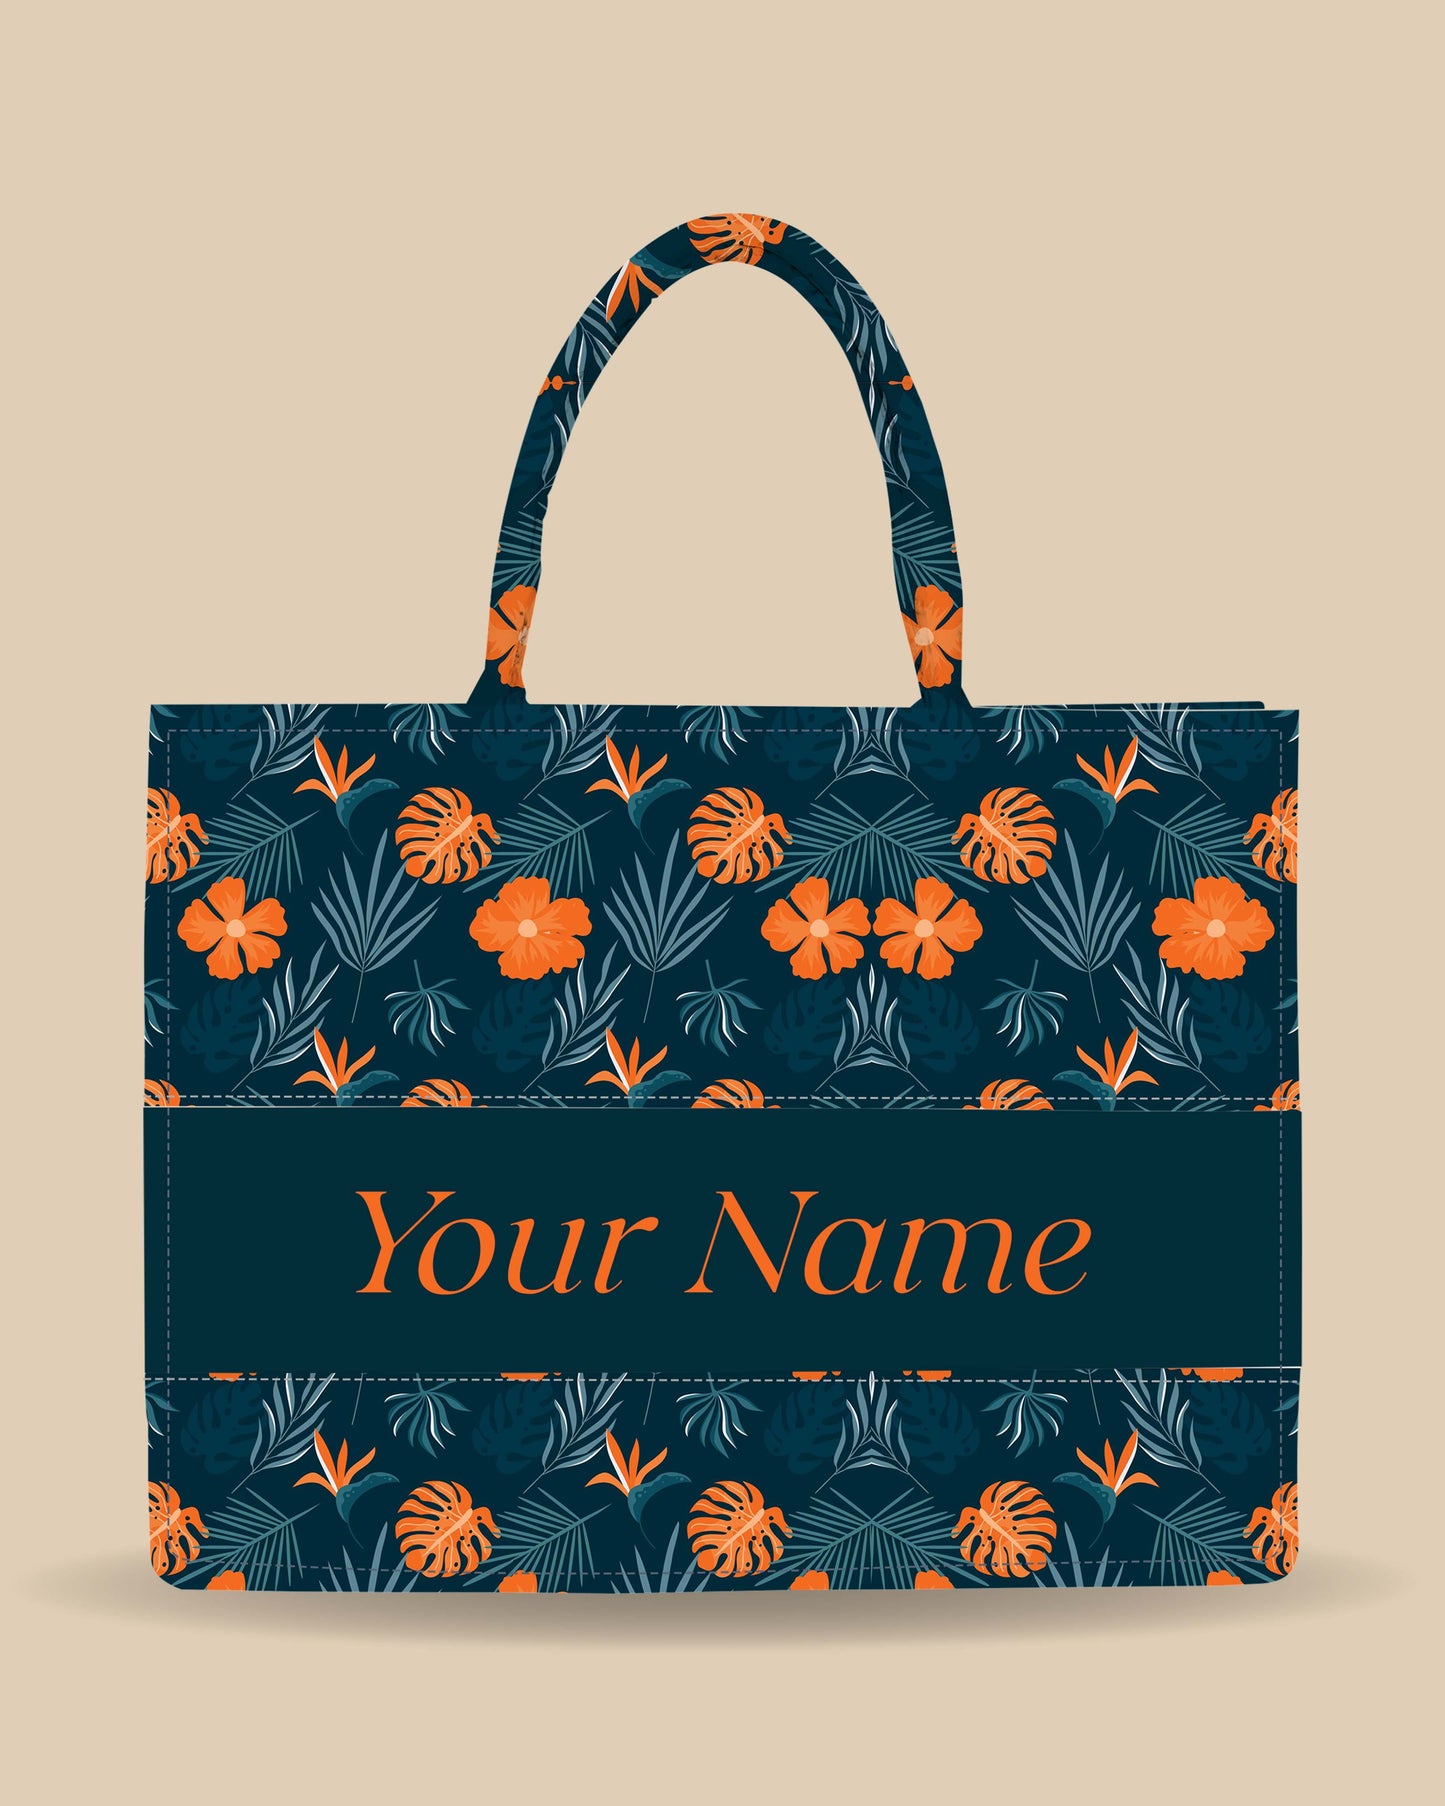 Customized Tote Bag Designed With Summer Flowers And Tropical Leaves